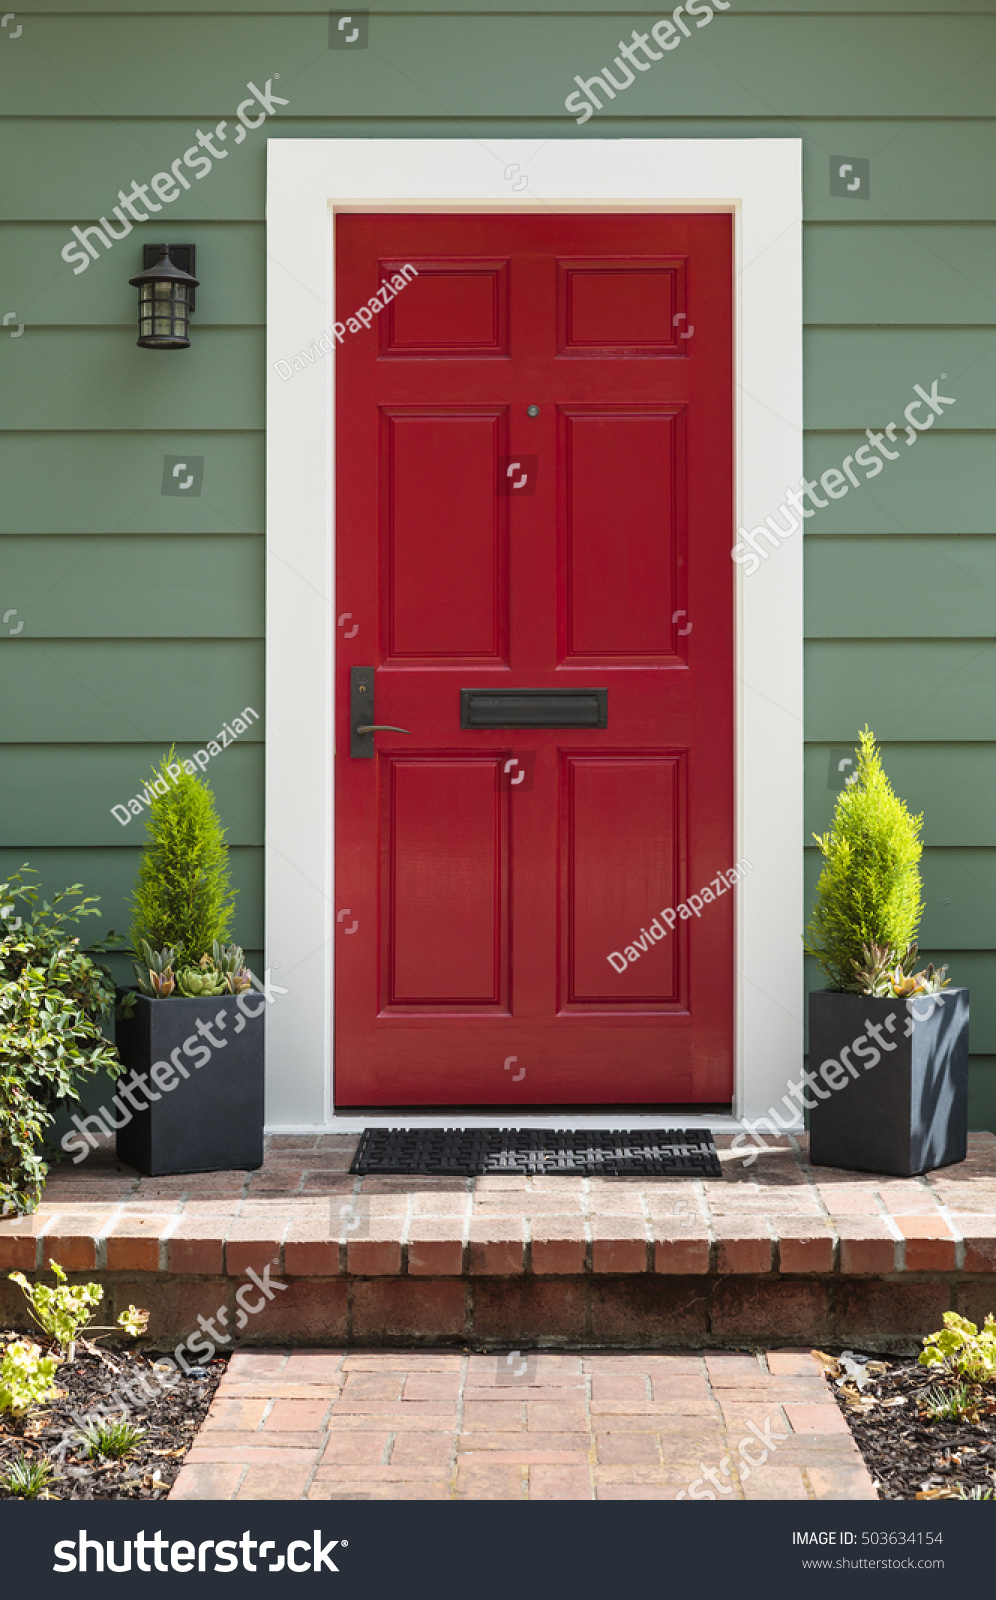 Front view of a bright red front door. #503634154